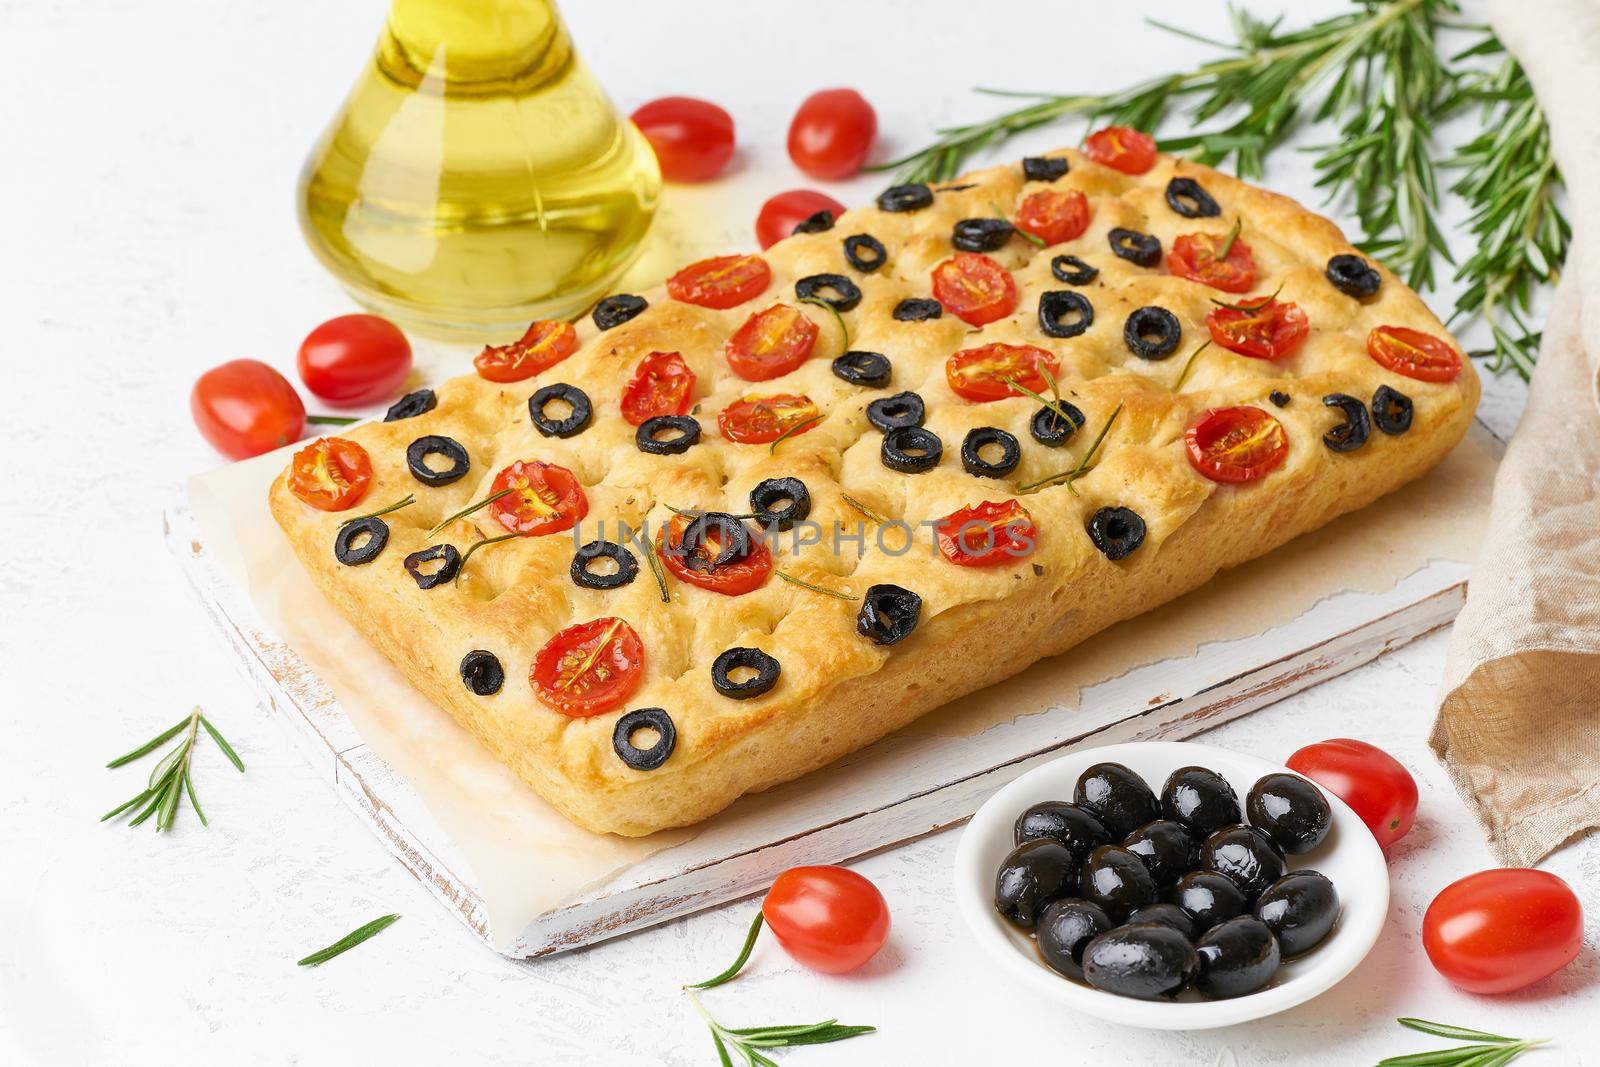 Focaccia with tomatoes, olives and rosemary. Whole Italian flat bread, bottle with oil by NataBene